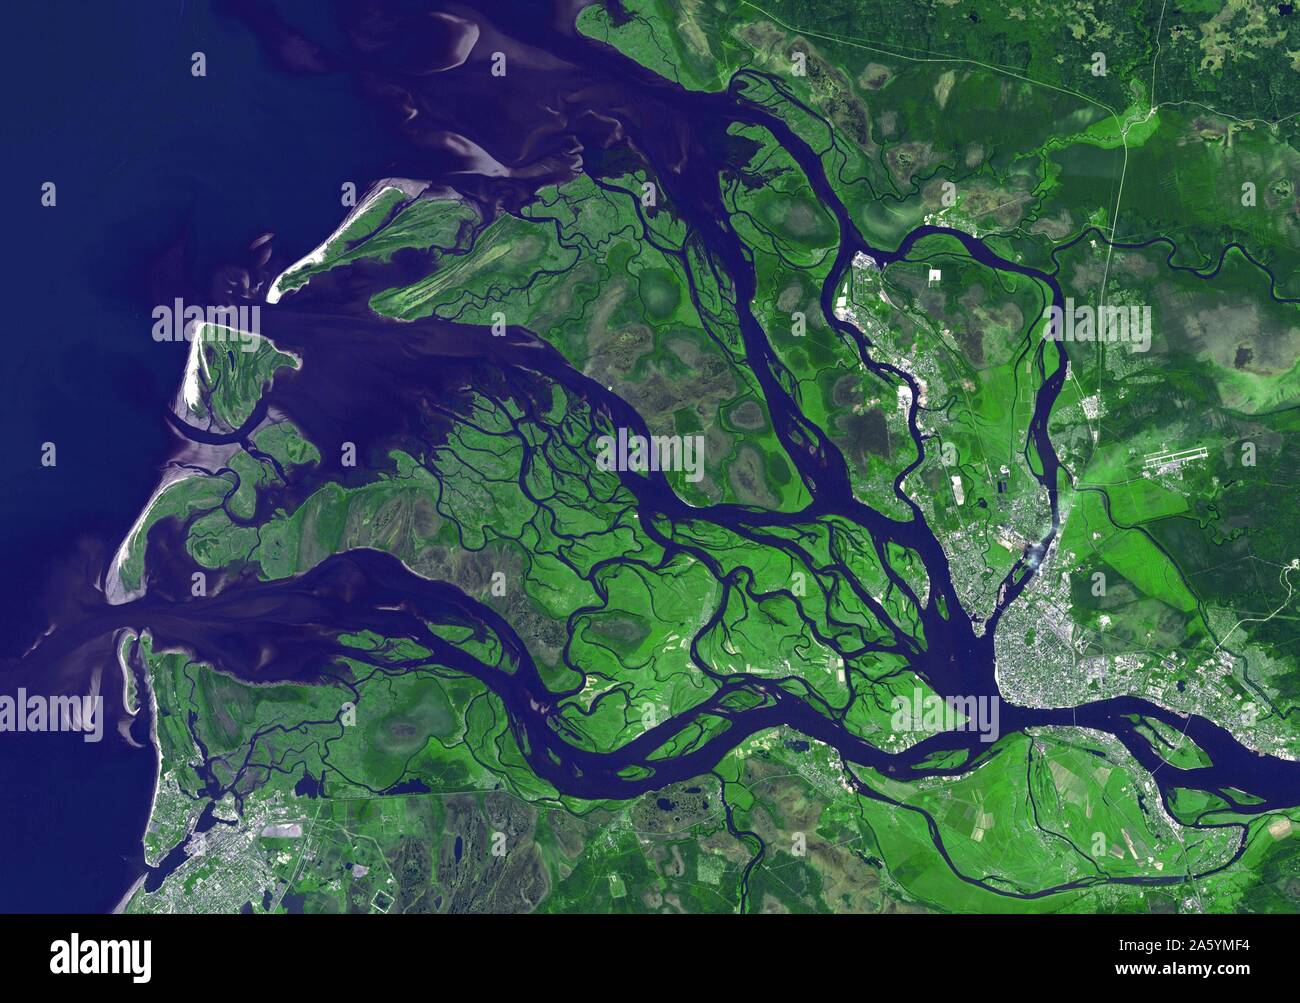 Arkhangelsk (or Archangel in English) is a city and the administrative capital of Archangelsk Oblast, Russia. It is situated on both banks of the Dvina River near where it flows into the White Sea. July 14, 2010. Satellite image. Stock Photo